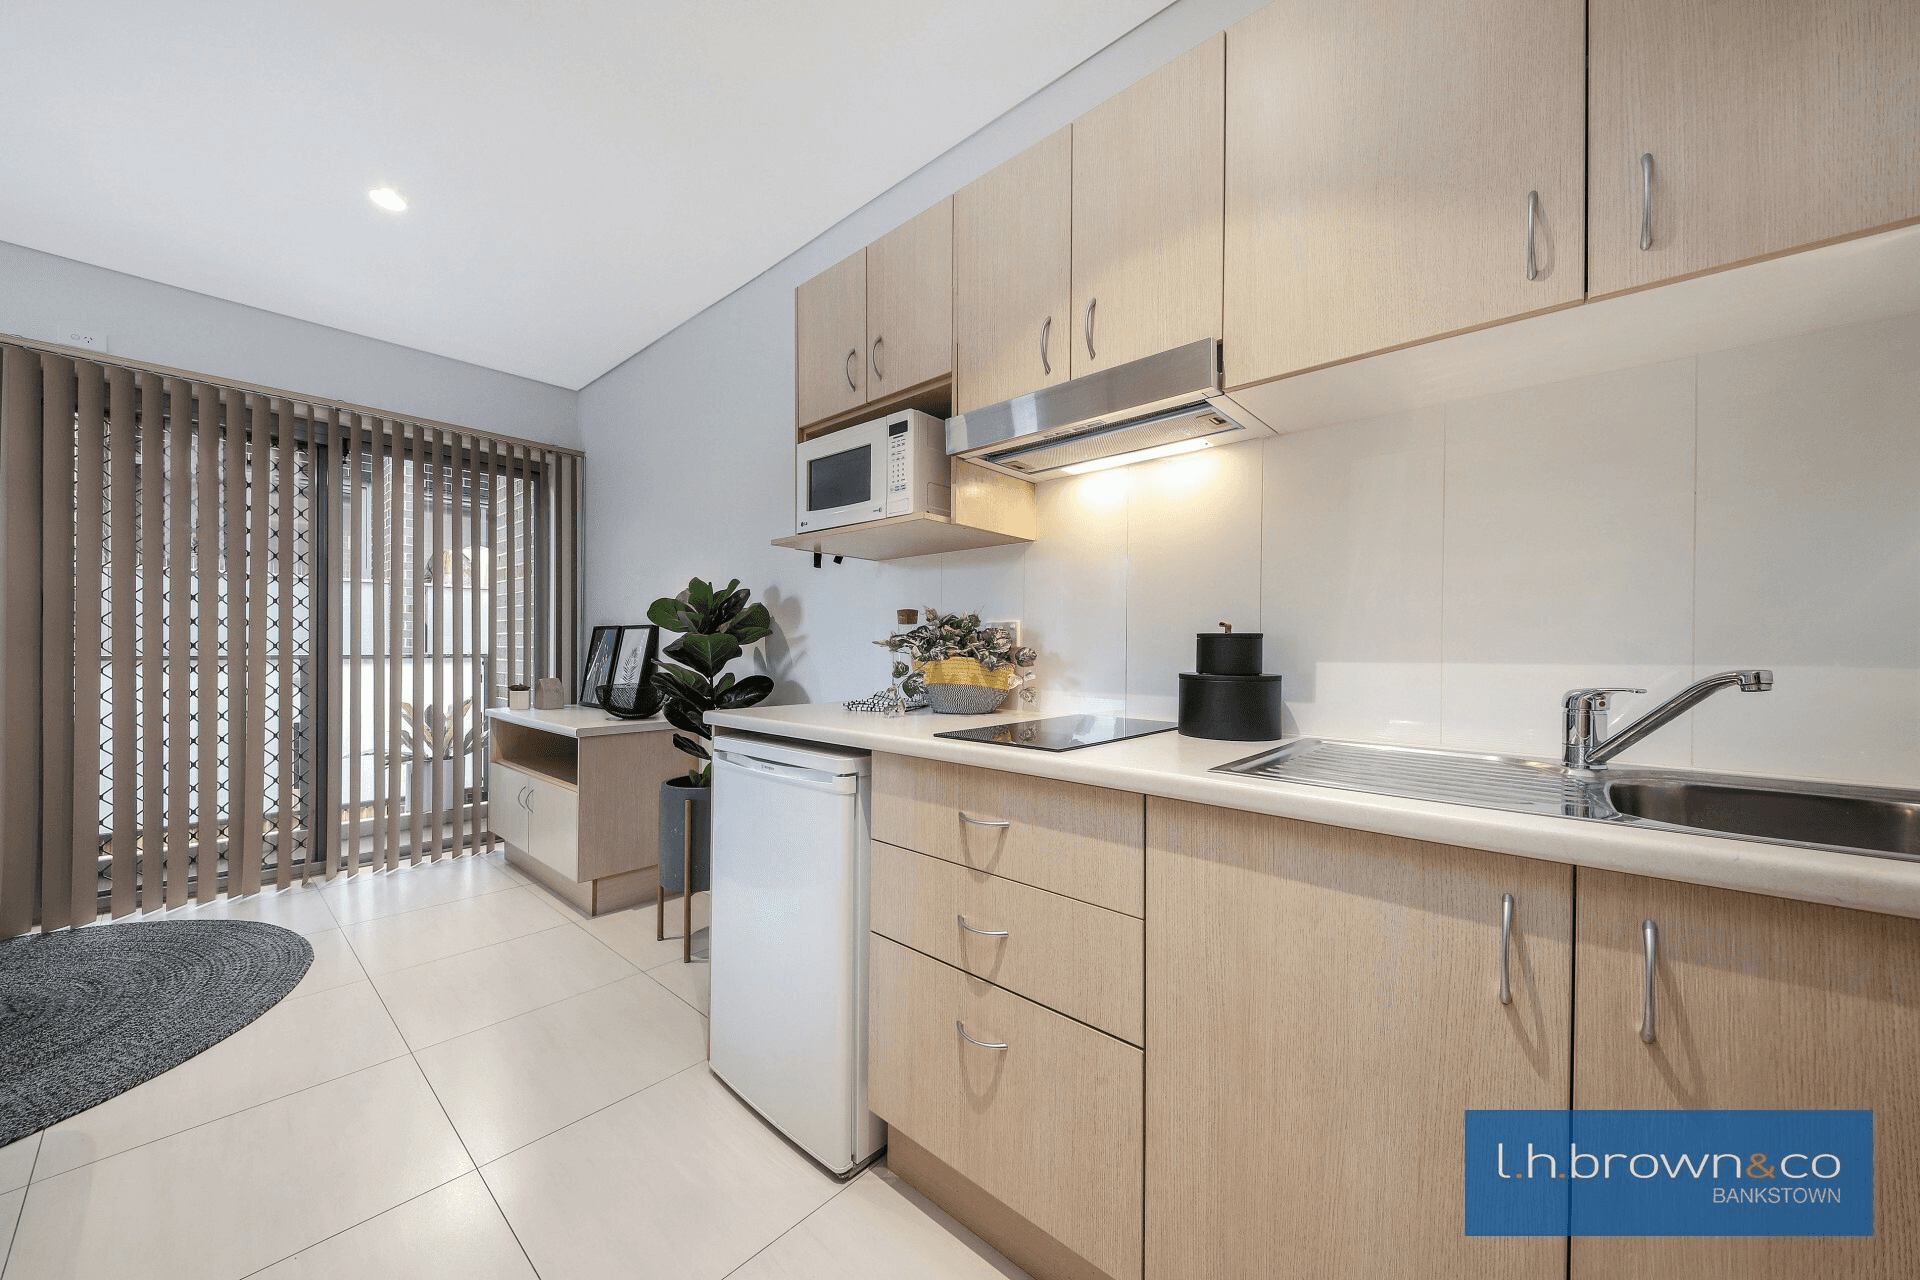 8-10 Cairds Avenue, Bankstown, NSW 2200